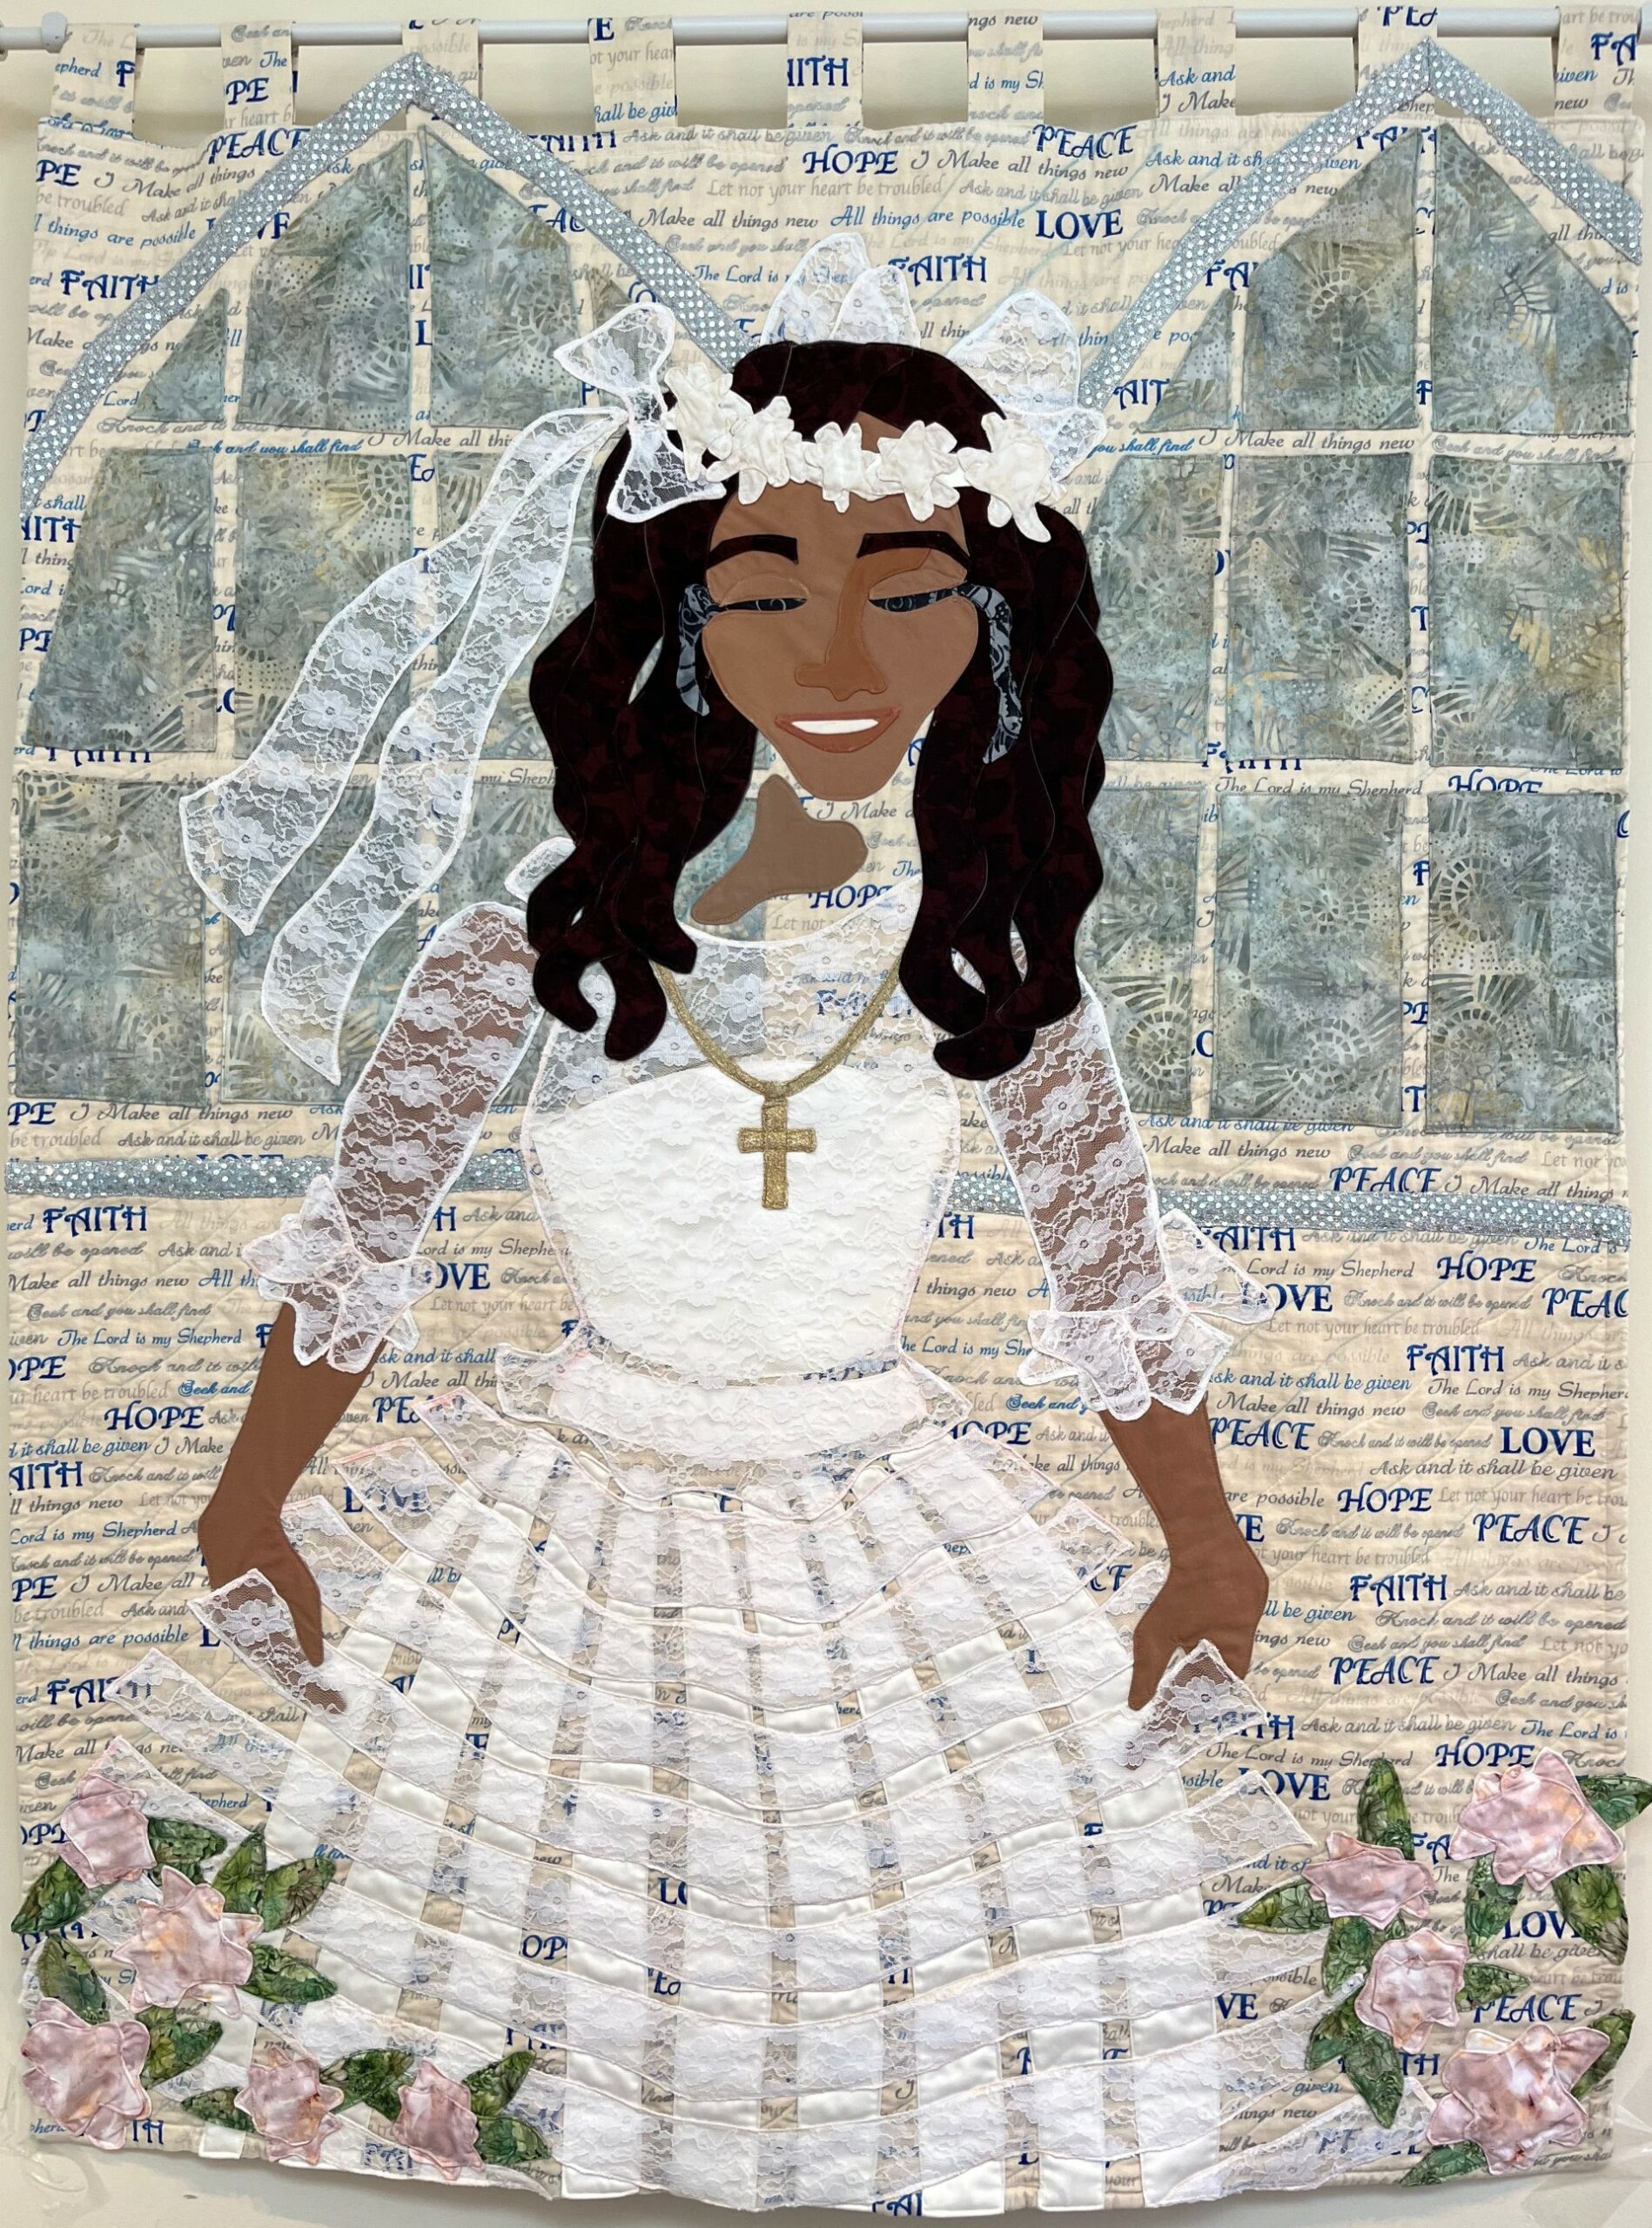 Jackie, Uvalde, Texas
Stitched fabric
53″ x 41″
2022
NFS
The obituary for Jaclyn Cazares read: 